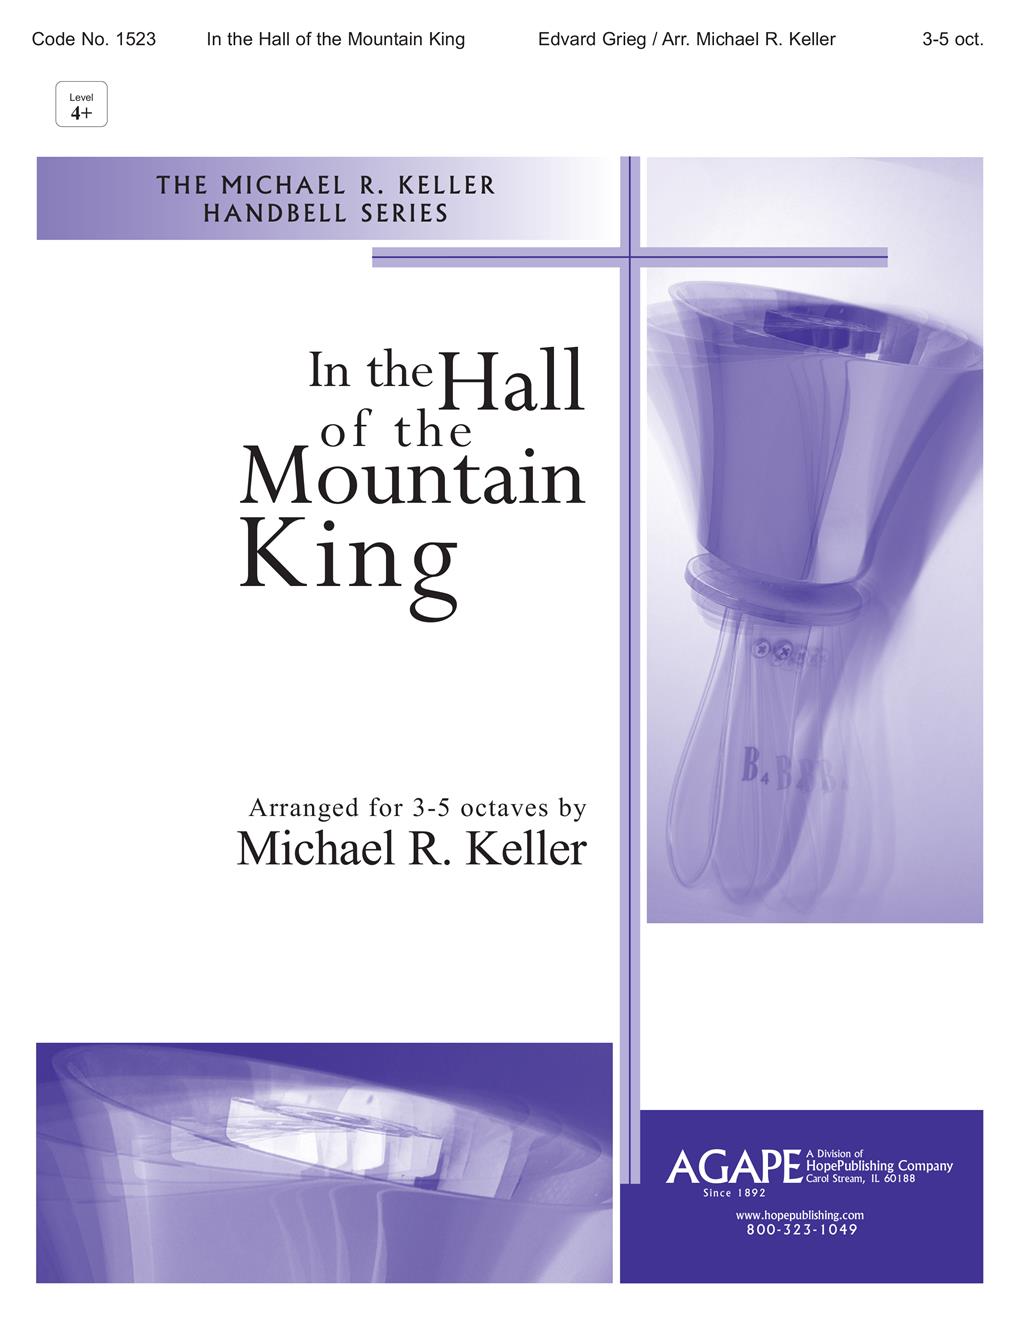 In the Hall of the Mountain King - 3-5 Oct. Cover Image